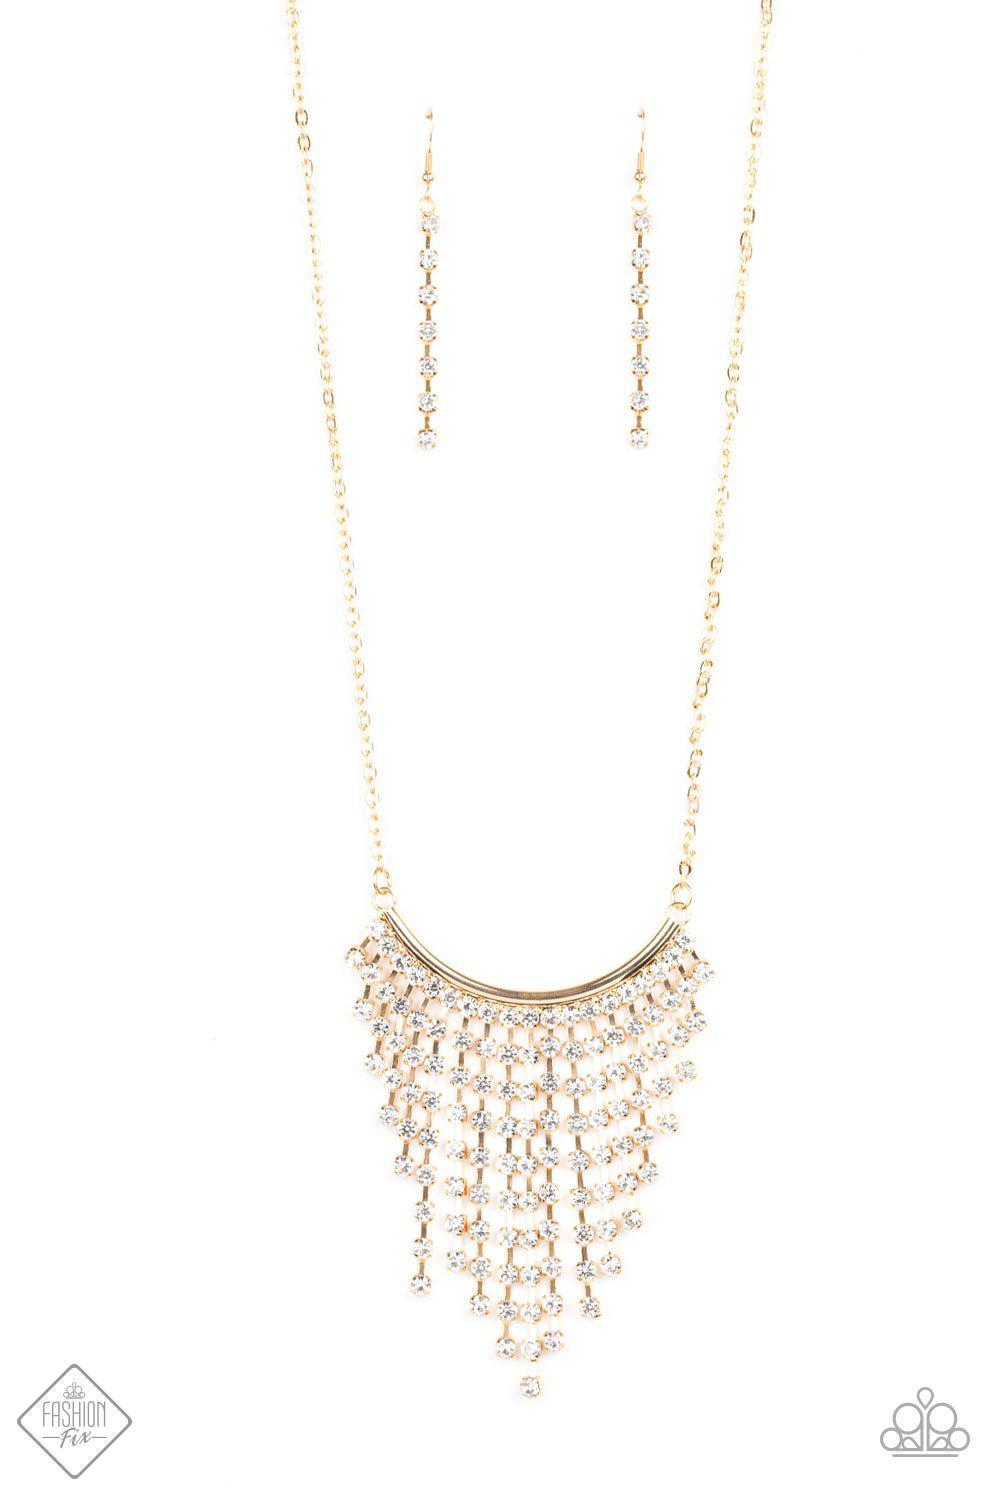 Glitter Bomb Gold and White Rhinestone Fringe Necklace - Paparazzi Accessories-CarasShop.com - $5 Jewelry by Cara Jewels